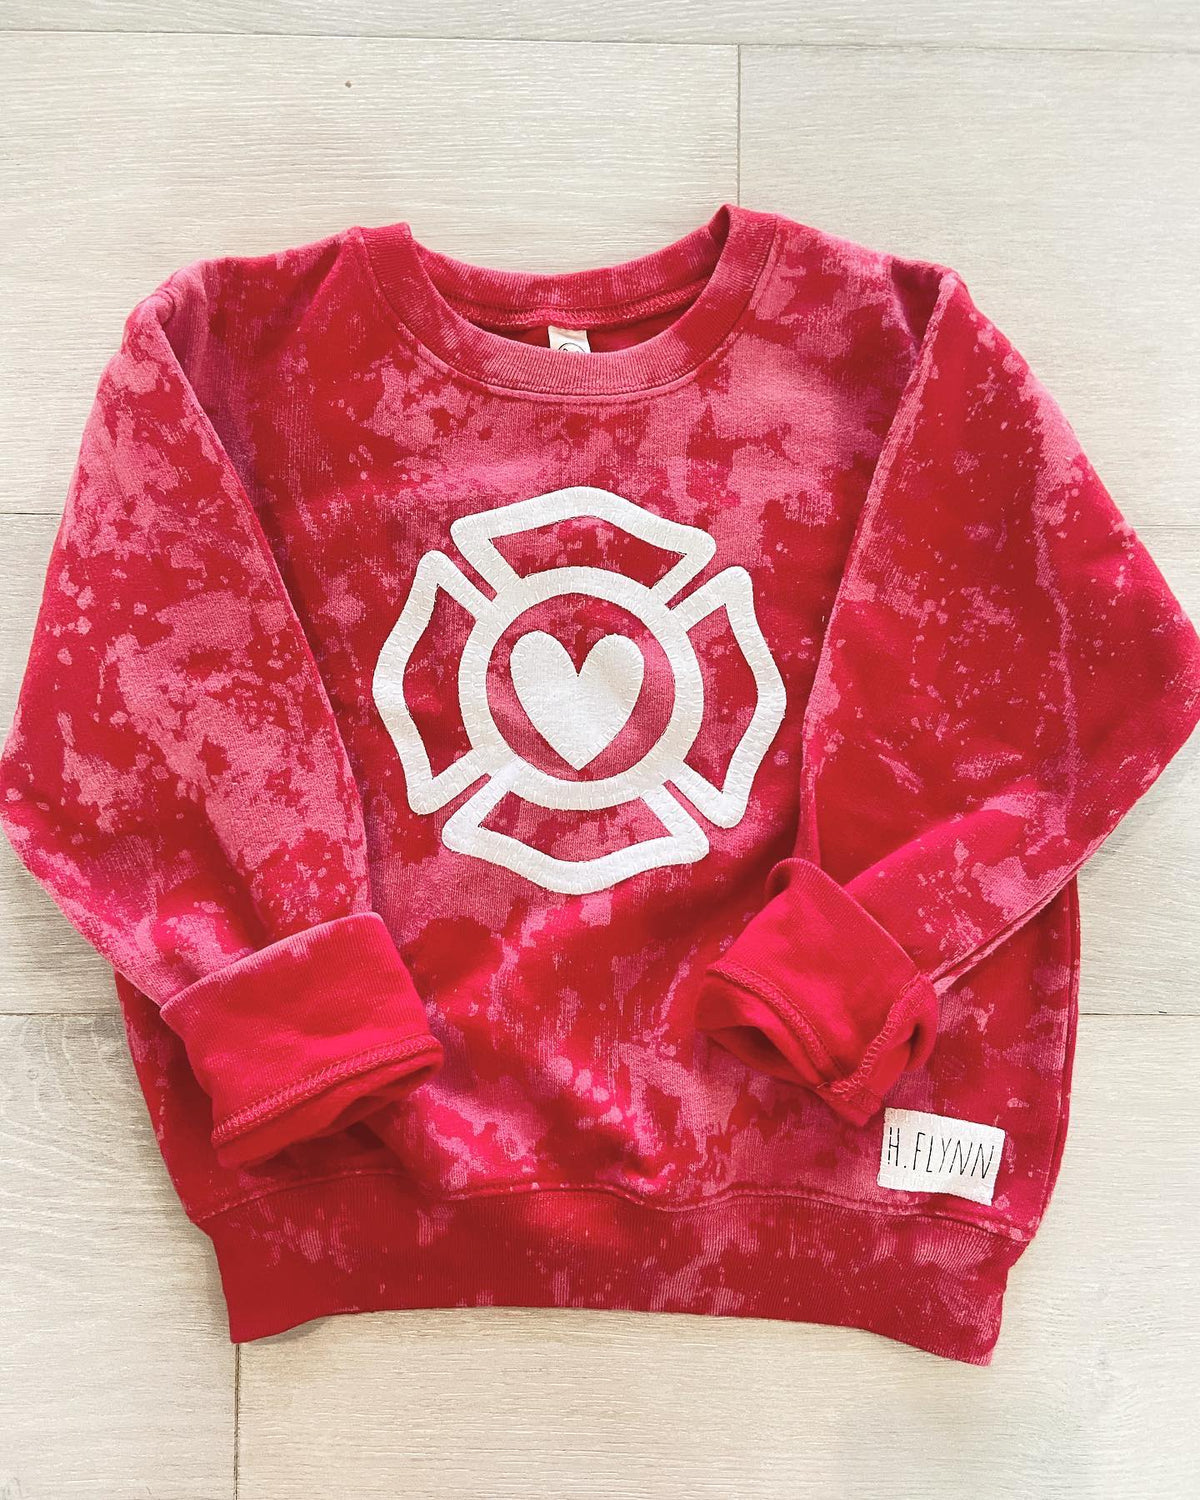 MALTESE CROSS - TODDLER + YOUTH + ADULT RED DYED CREW